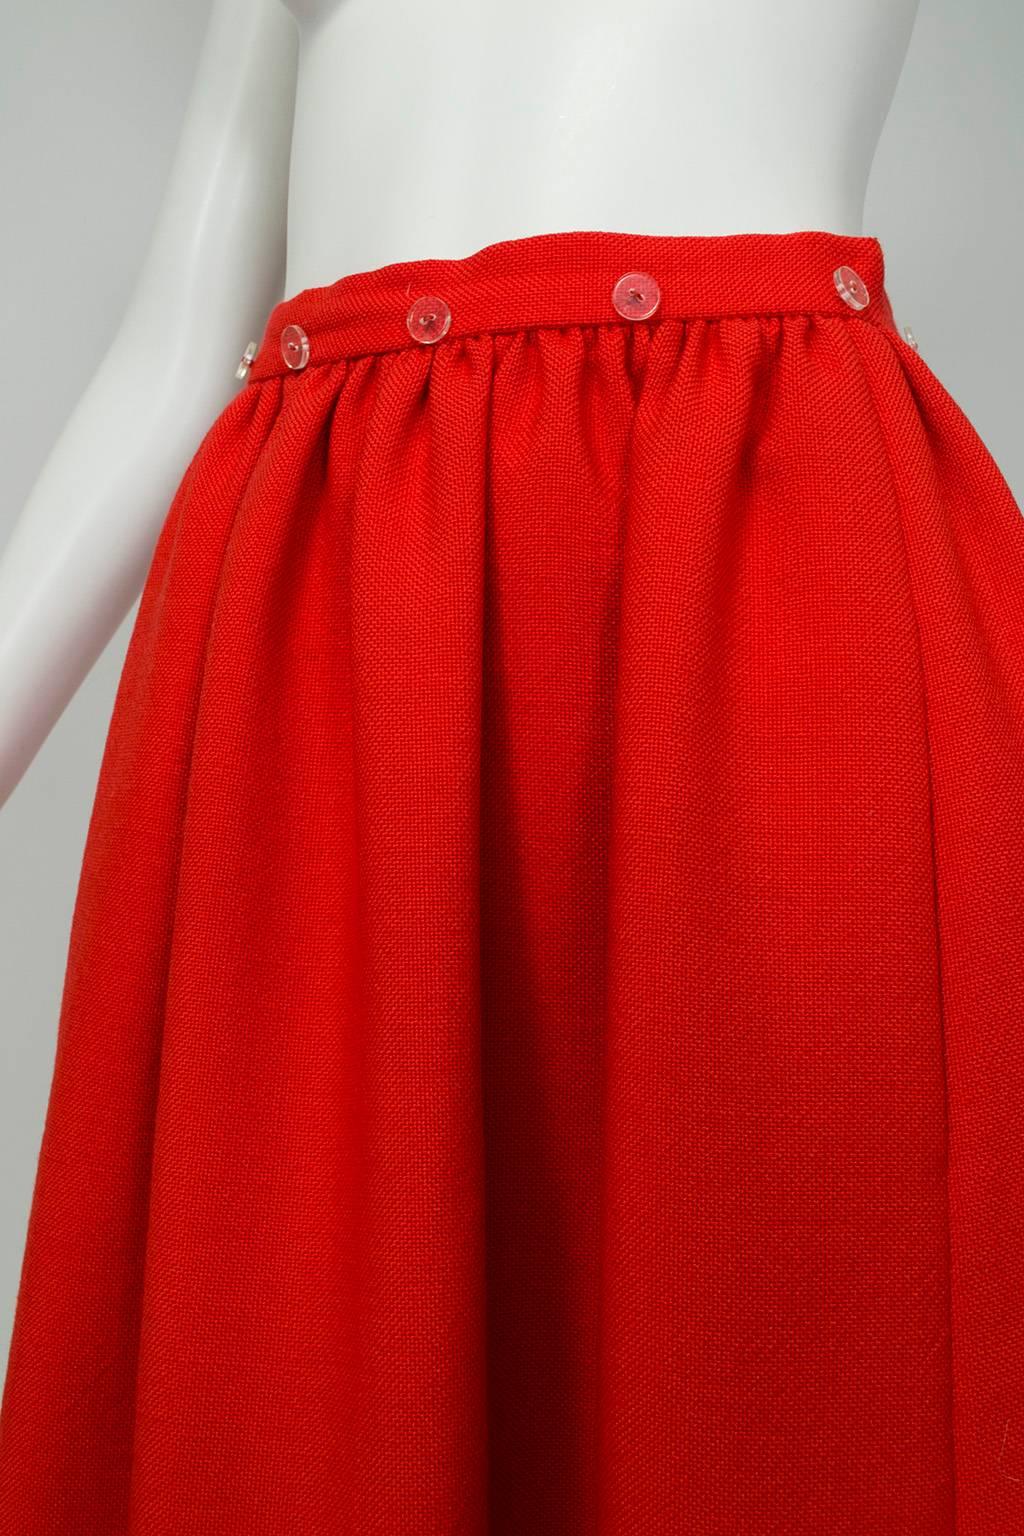 Norman Norell Heavyweight Red Gathered Hostess Skirt - Small, 1960s For Sale 1